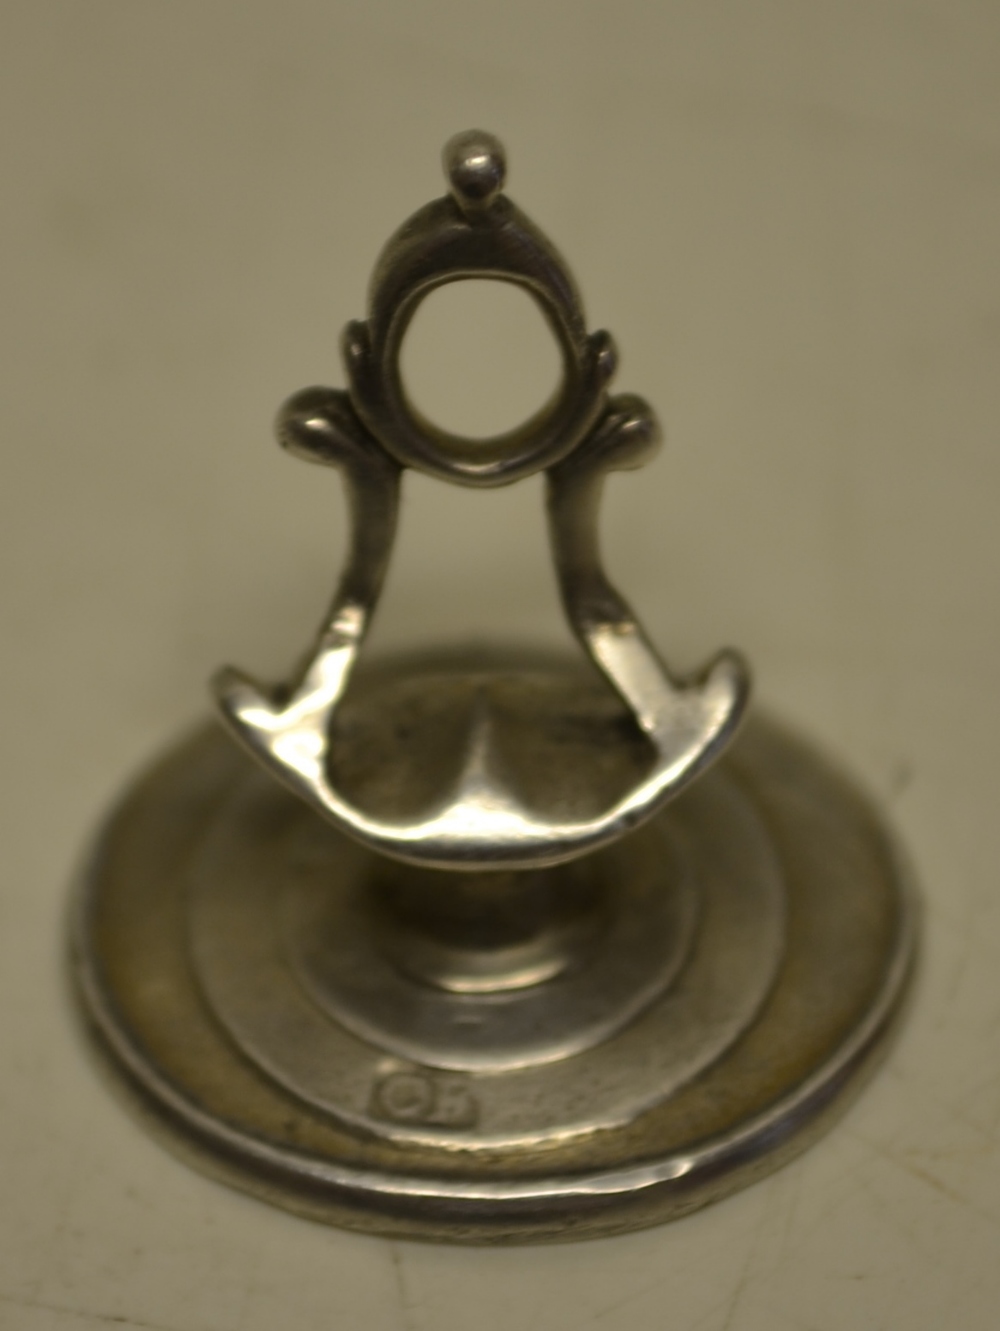 A George III silver oval seal, with an angled pierced thumb piece handle, the matrix with intaglio